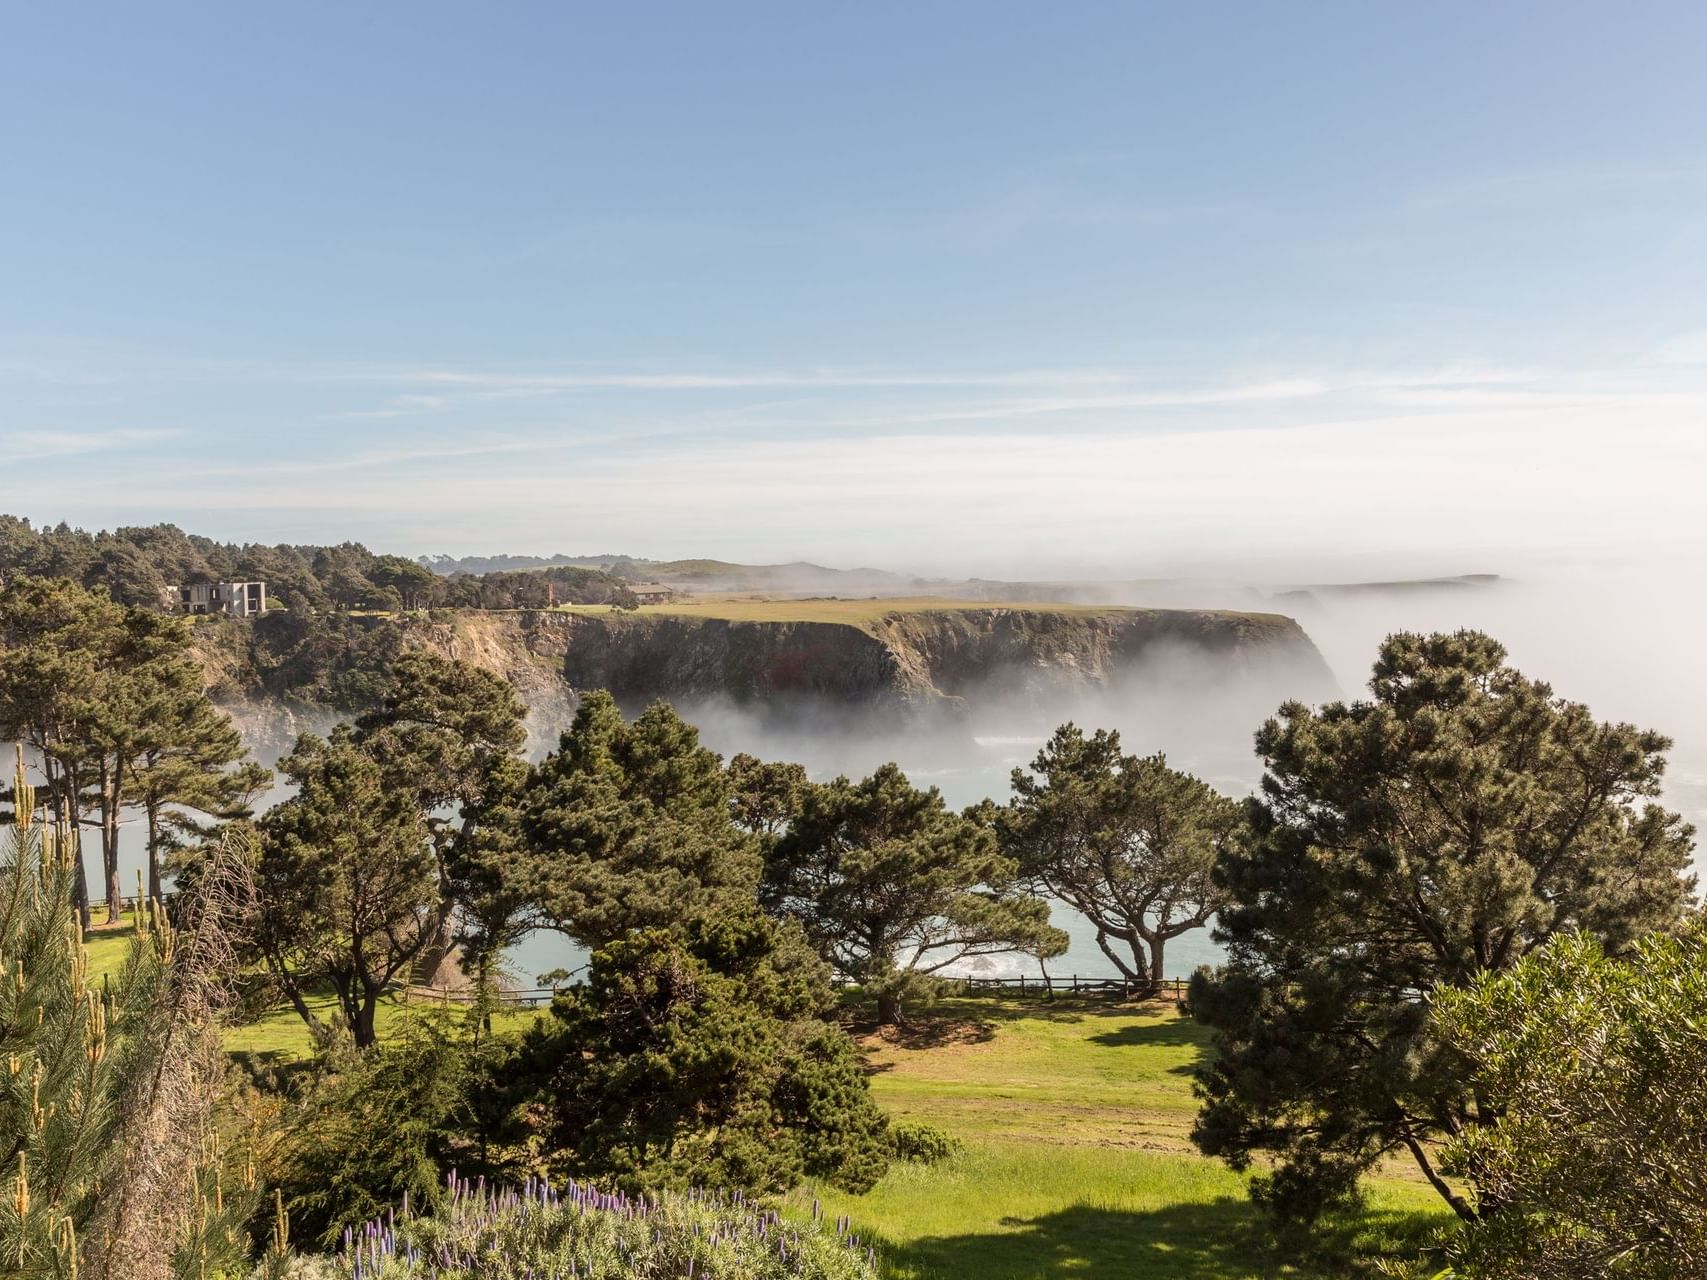 The coastline covered in mist at The Heritage House Resort